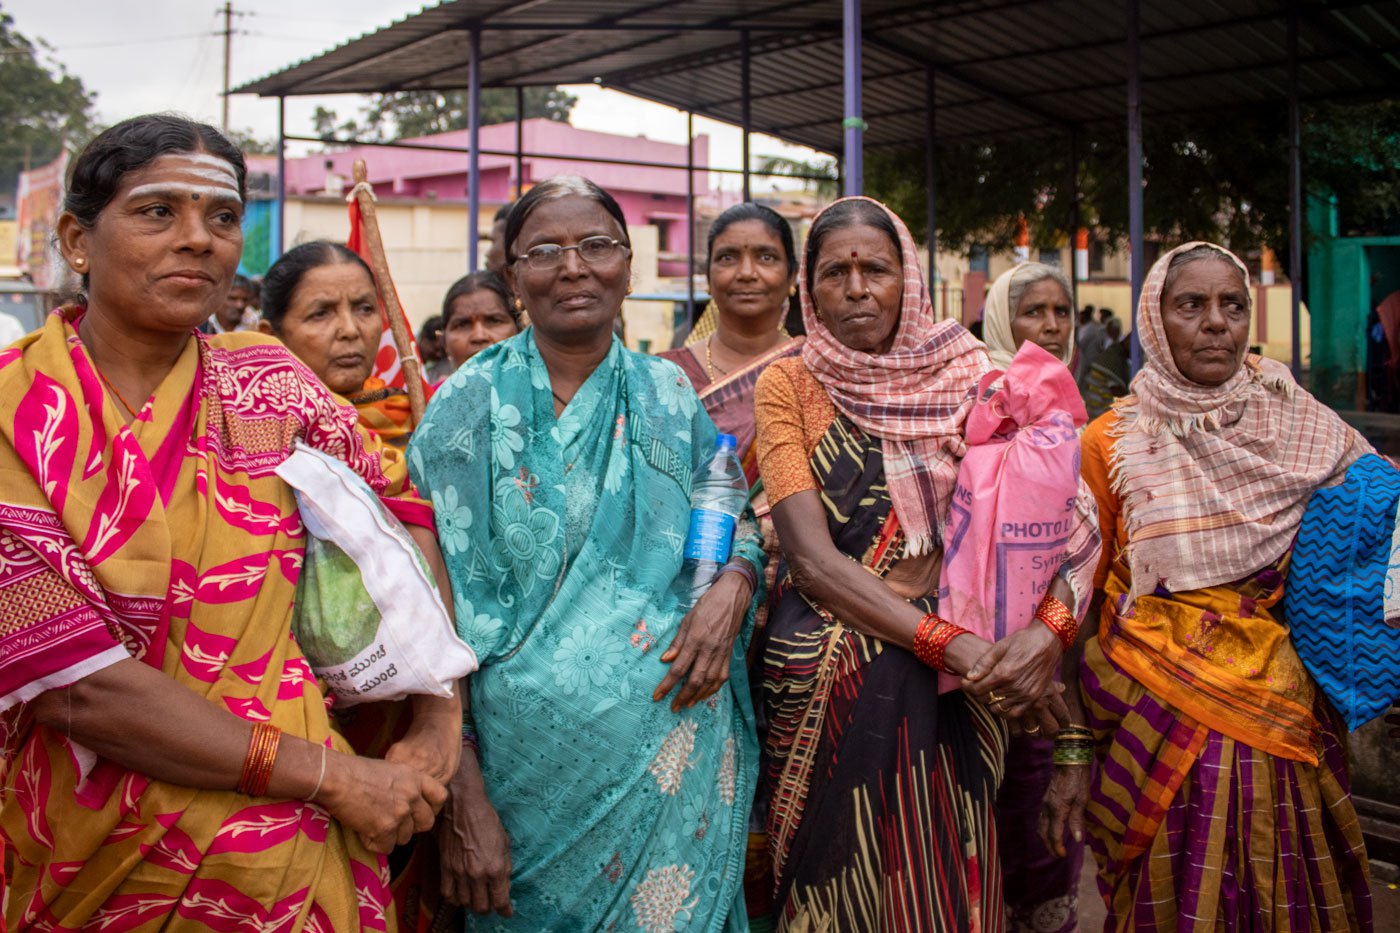 Hanumakka Ranganna (second from left) and Hampakka Bheemappa (third from left) along with other women mine workers all set to continue the protest march, after they had stopped at Vaddu village in Sandur to rest